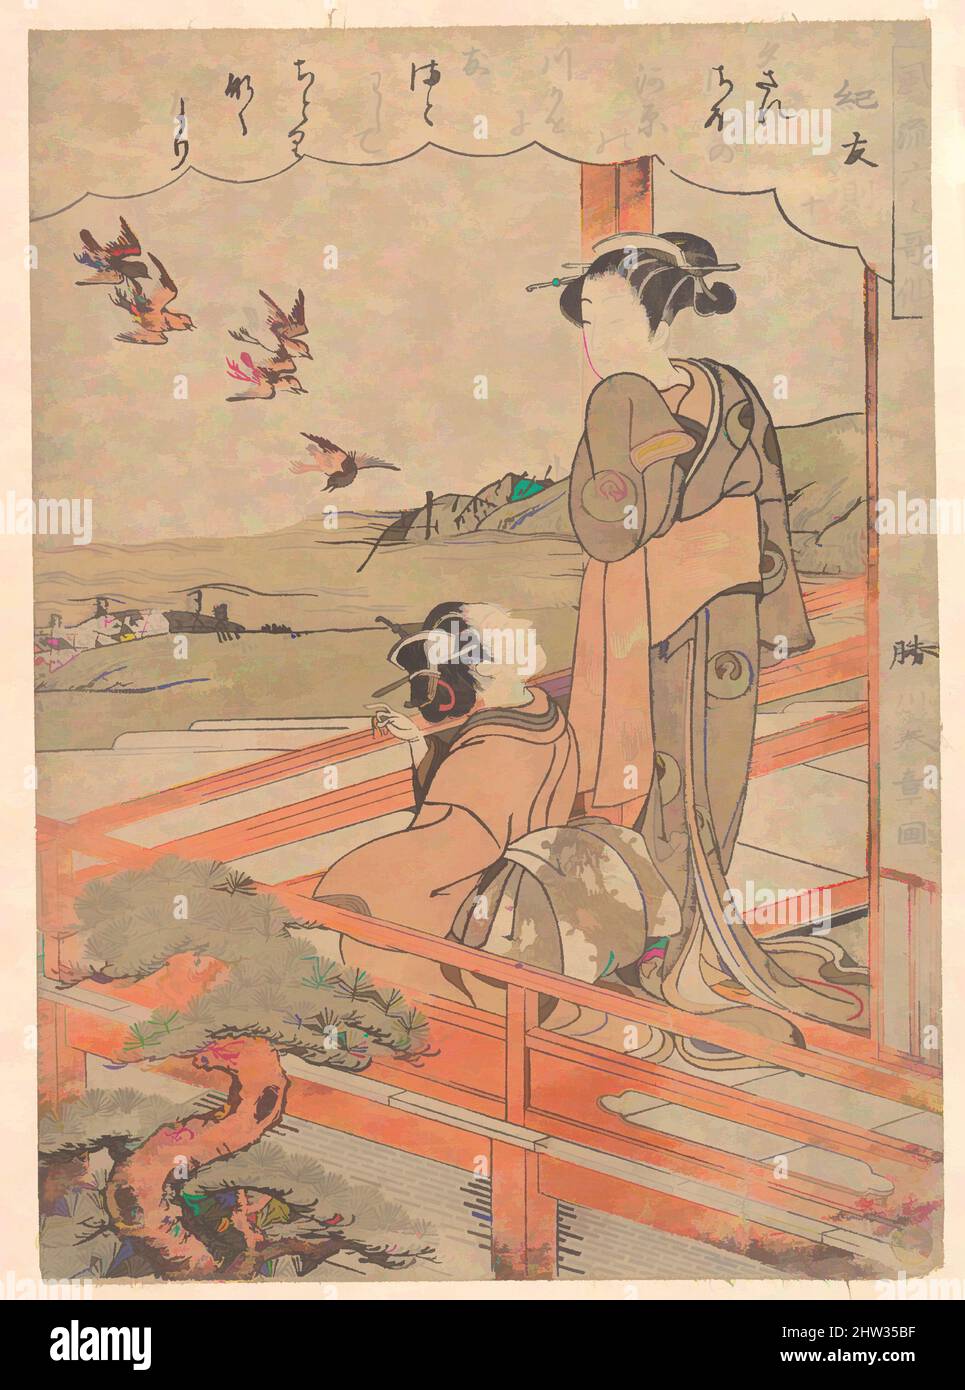 Art inspired by 「風流六く歌仙紀友則　十」, “Two Young Women on a Verandah Watching Plovers,” from the series Stylish Six Poetic Immortals (Fūryū rokkasen: Ki no Tomonori, jū), Edo period (1615–1868), ca. 1770, Japan, Polychrome woodblock print; ink and color on paper, 9 7/8 x 7 1/8 in. (25.1 x 18., Classic works modernized by Artotop with a splash of modernity. Shapes, color and value, eye-catching visual impact on art. Emotions through freedom of artworks in a contemporary way. A timeless message pursuing a wildly creative new direction. Artists turning to the digital medium and creating the Artotop NFT Stock Photo